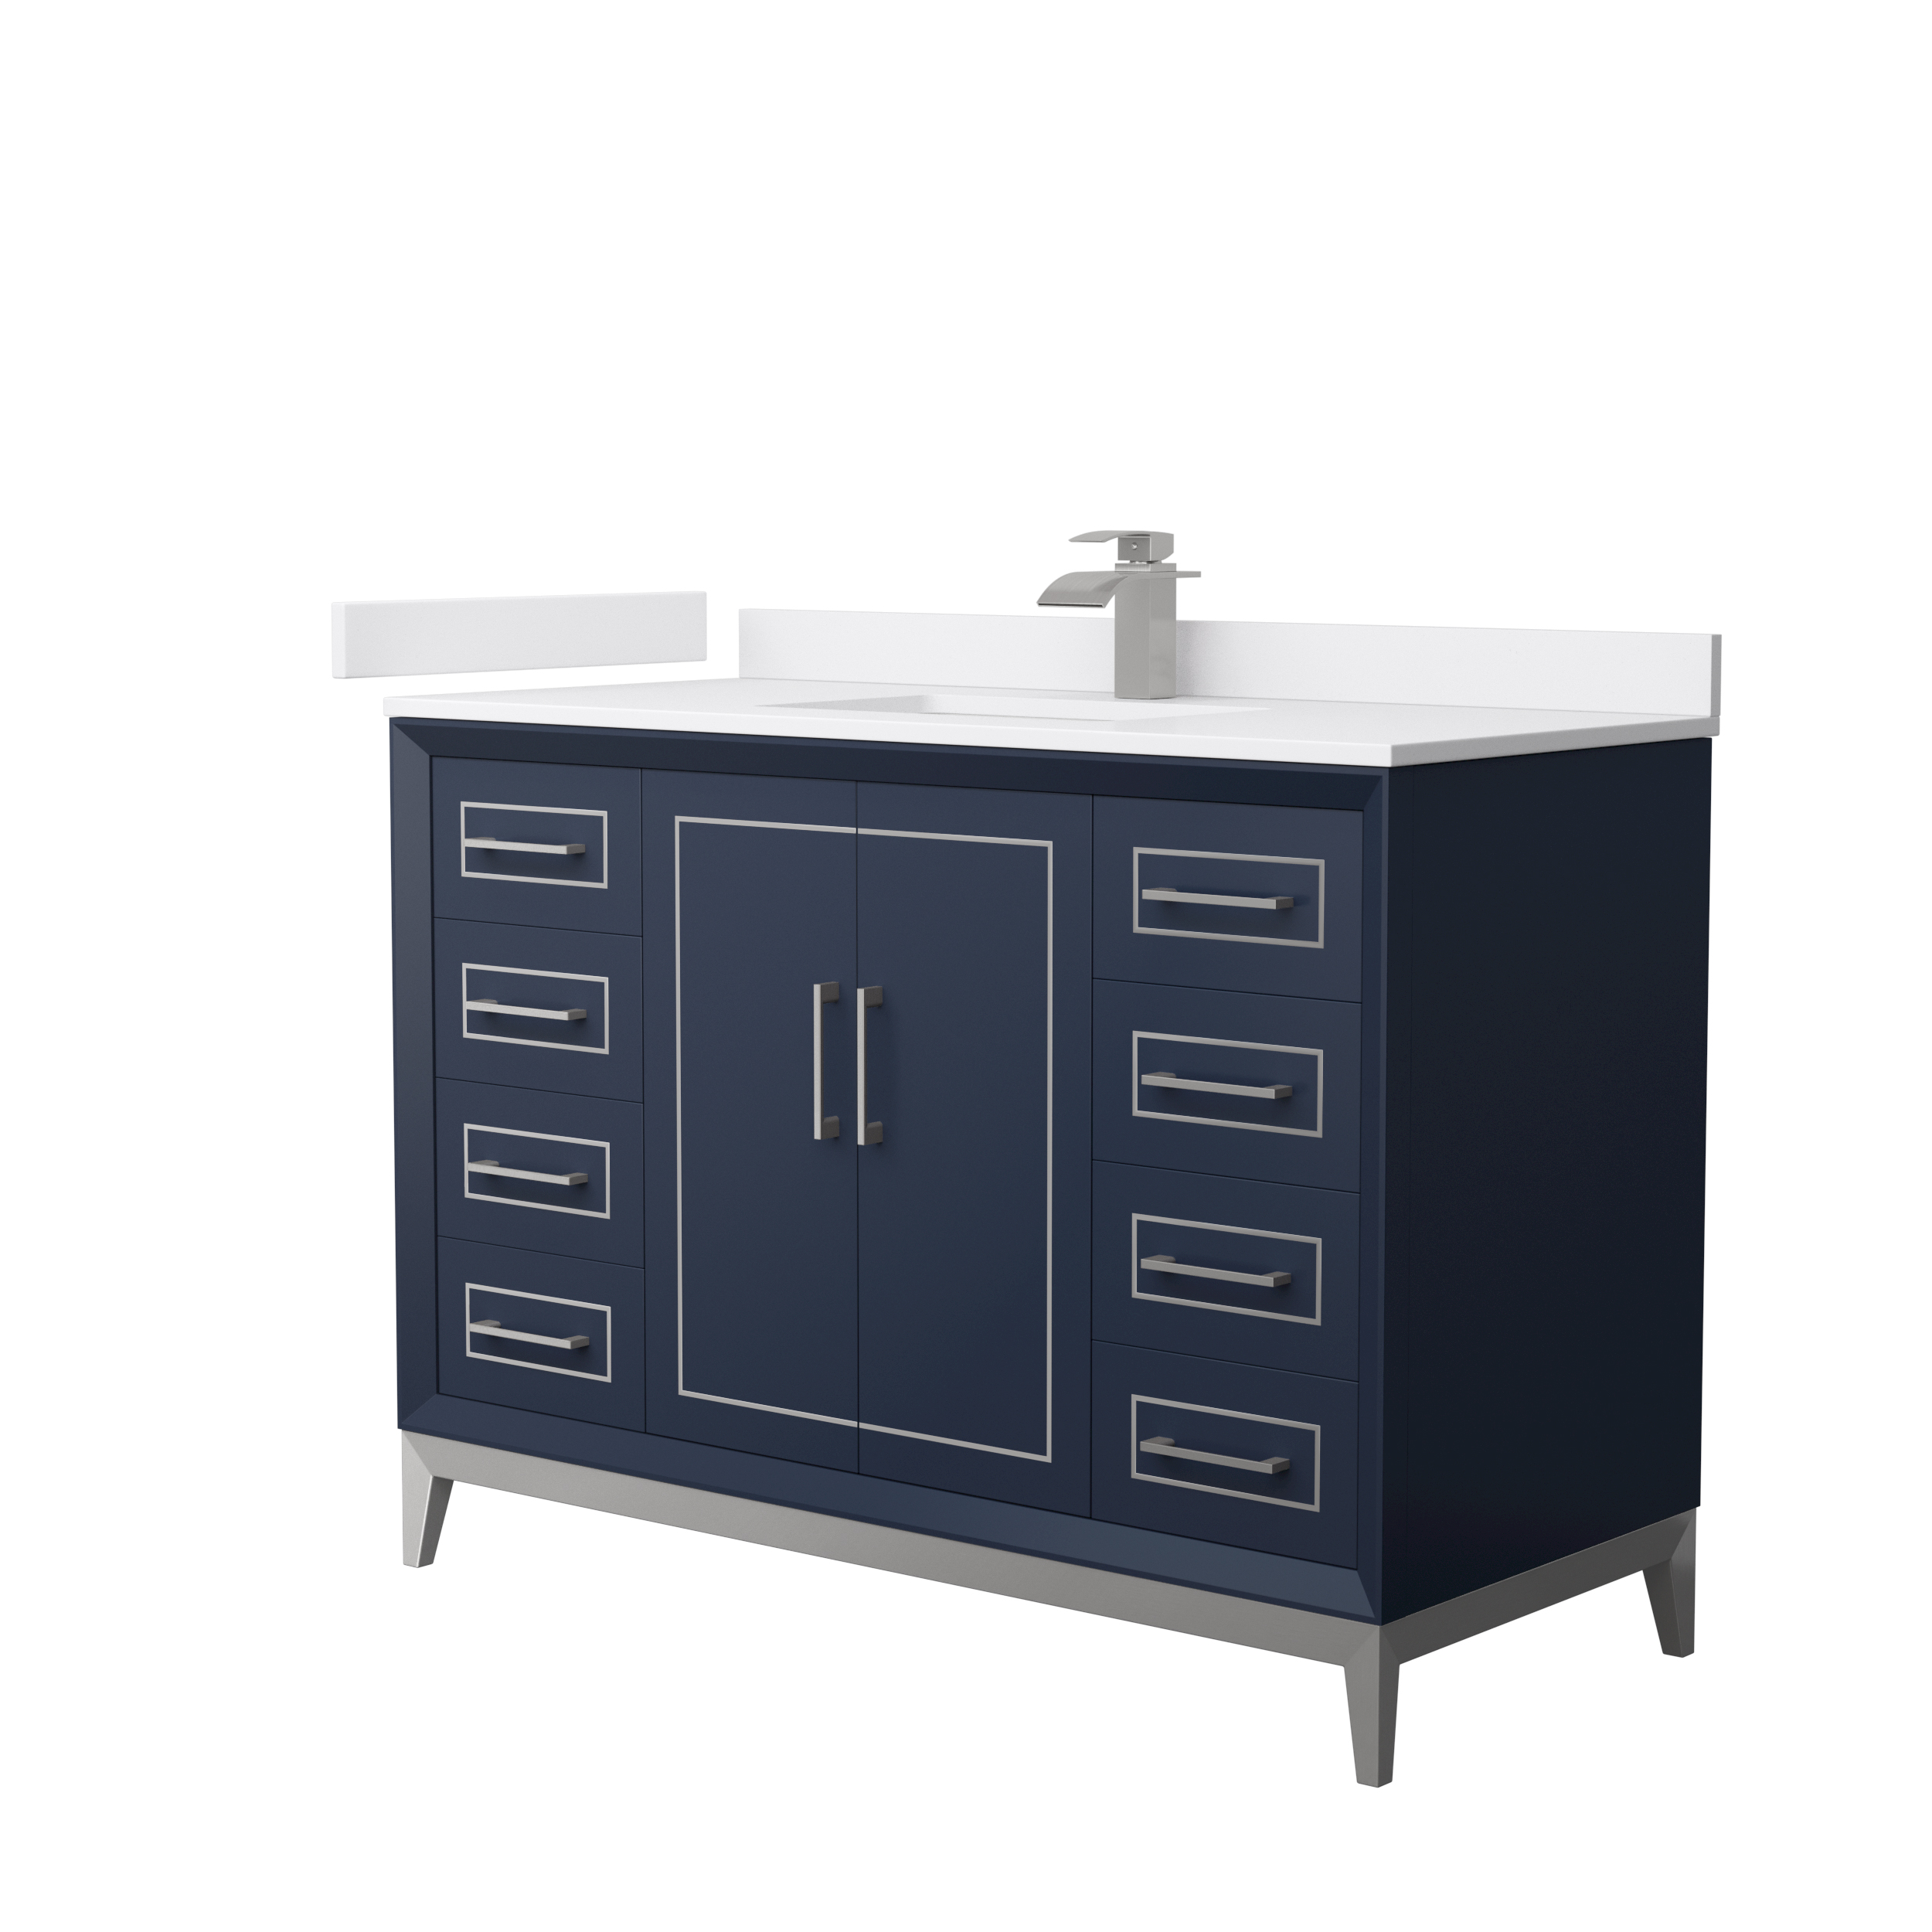 marlena 48" single vanity with optional cultured marble counter - dark blue